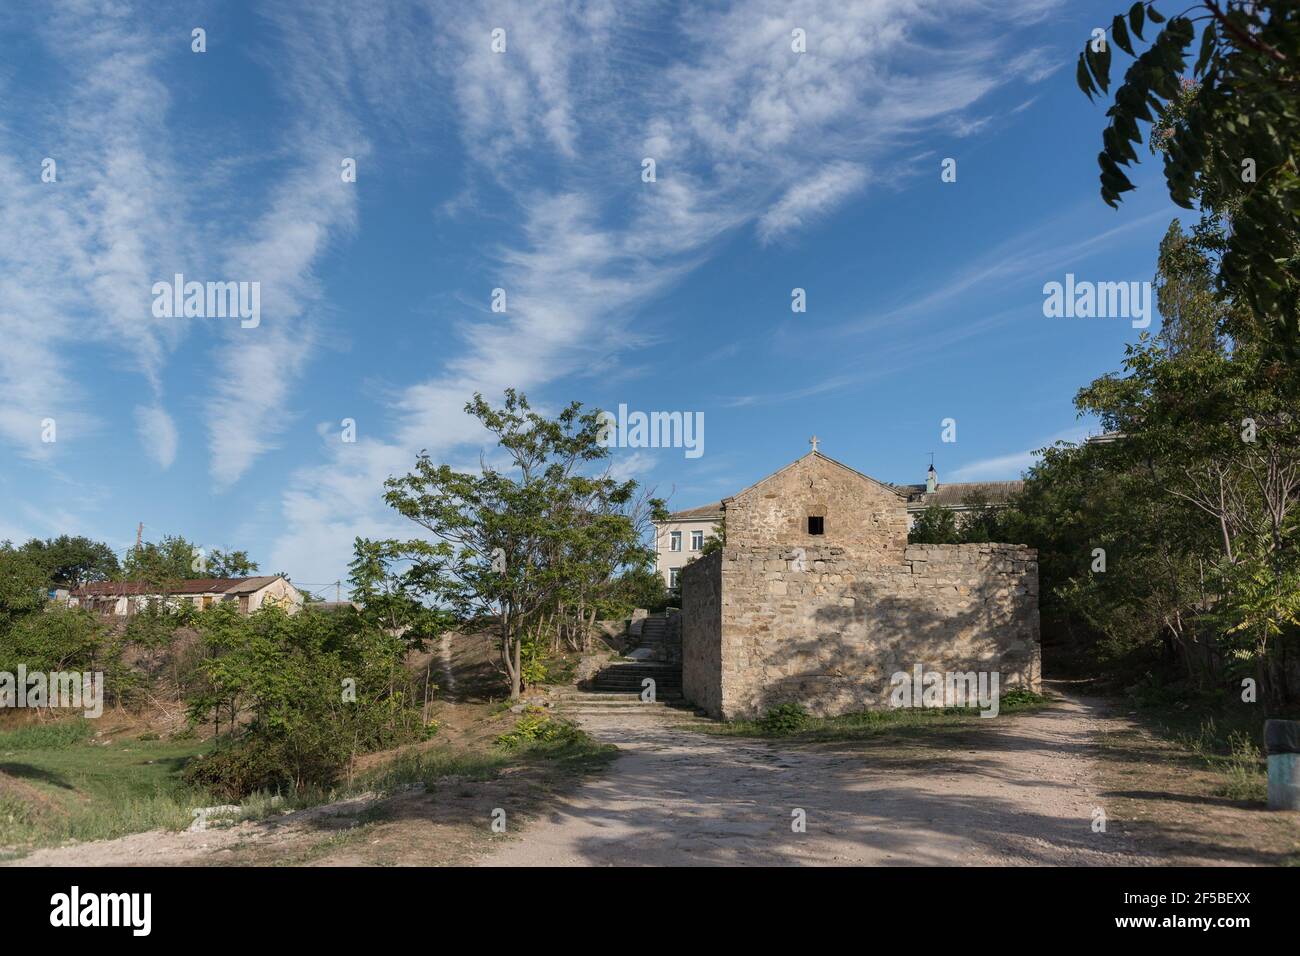 The Church of St. John the Theologian, belonging to the buildings of the Genoese fortress of Quarantine in Feodosia, according to existing data, was b Stock Photo